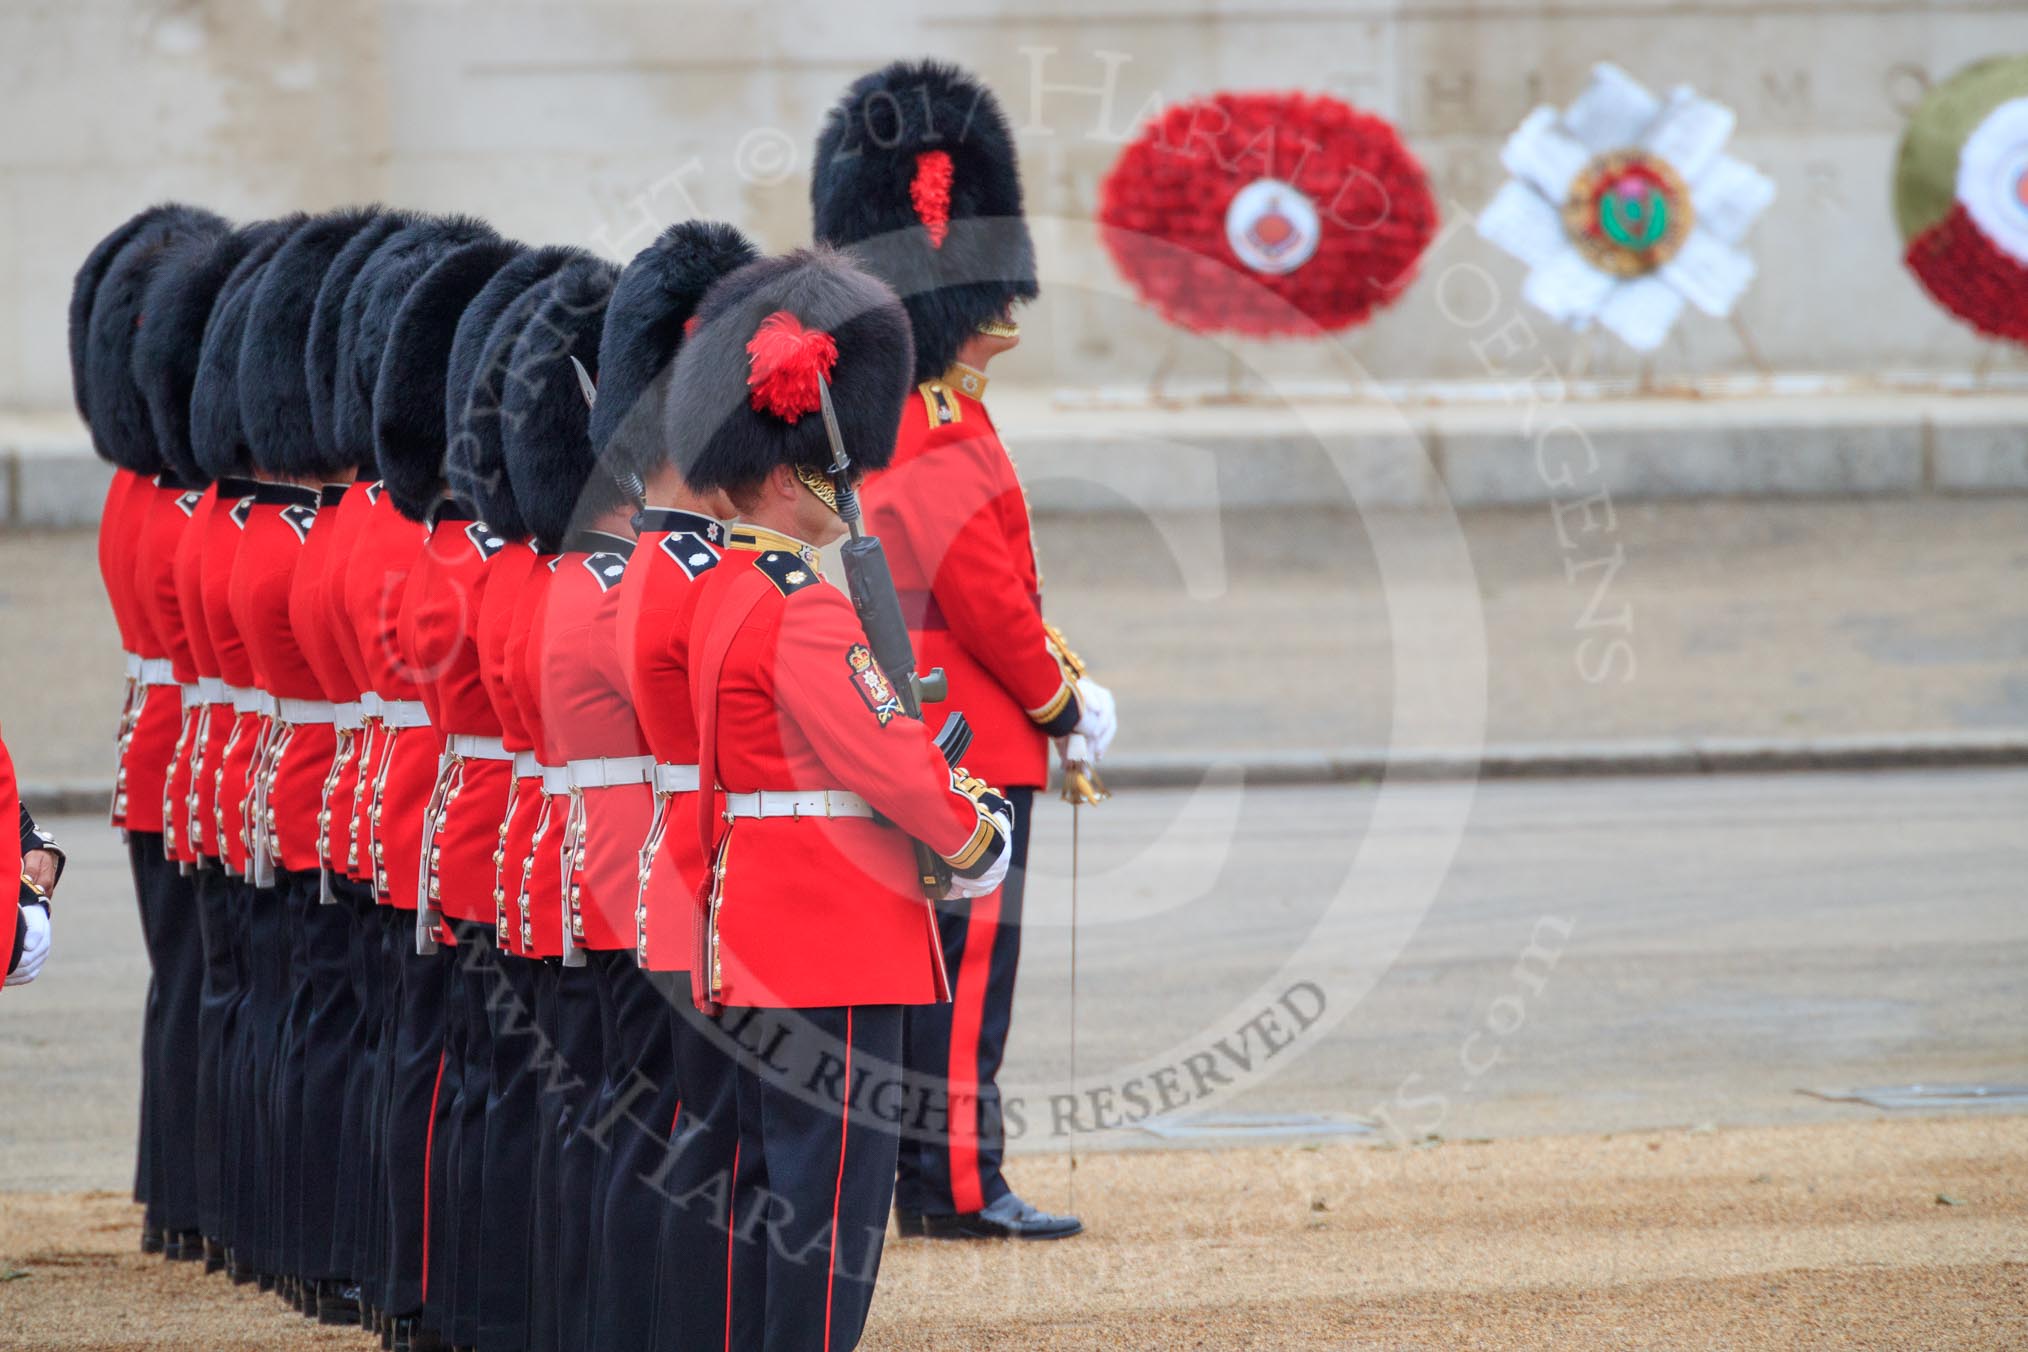 during The Colonel's Review {iptcyear4} (final rehearsal for Trooping the Colour, The Queen's Birthday Parade)  at Horse Guards Parade, Westminster, London, 2 June 2018, 10:47.